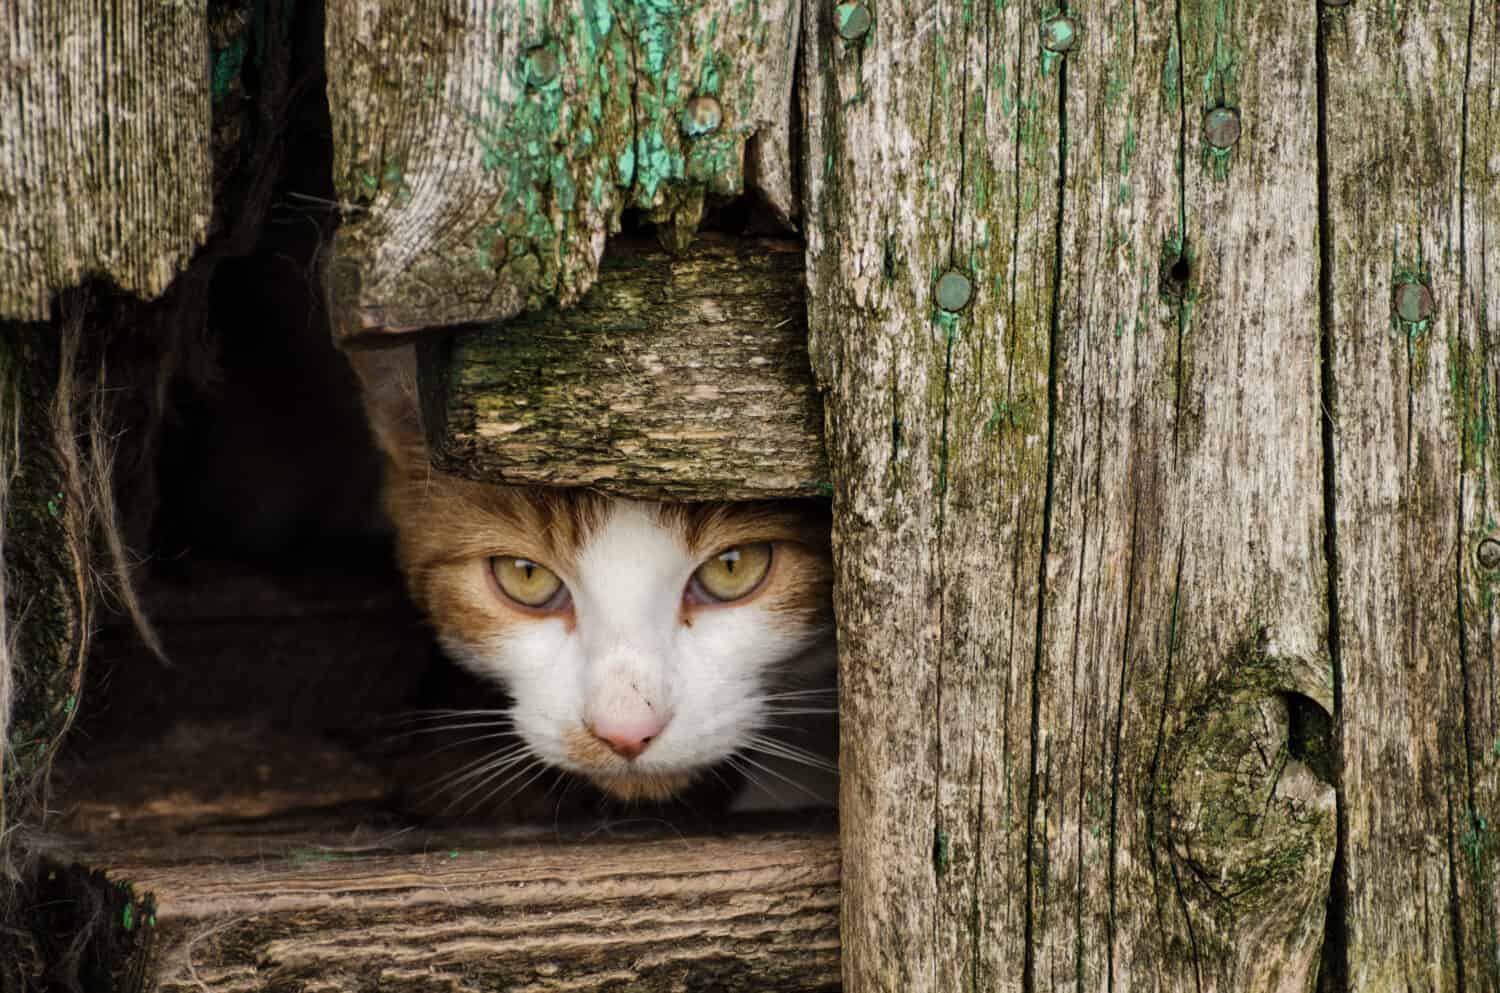 Feral cats live in an abandoned farmhouse